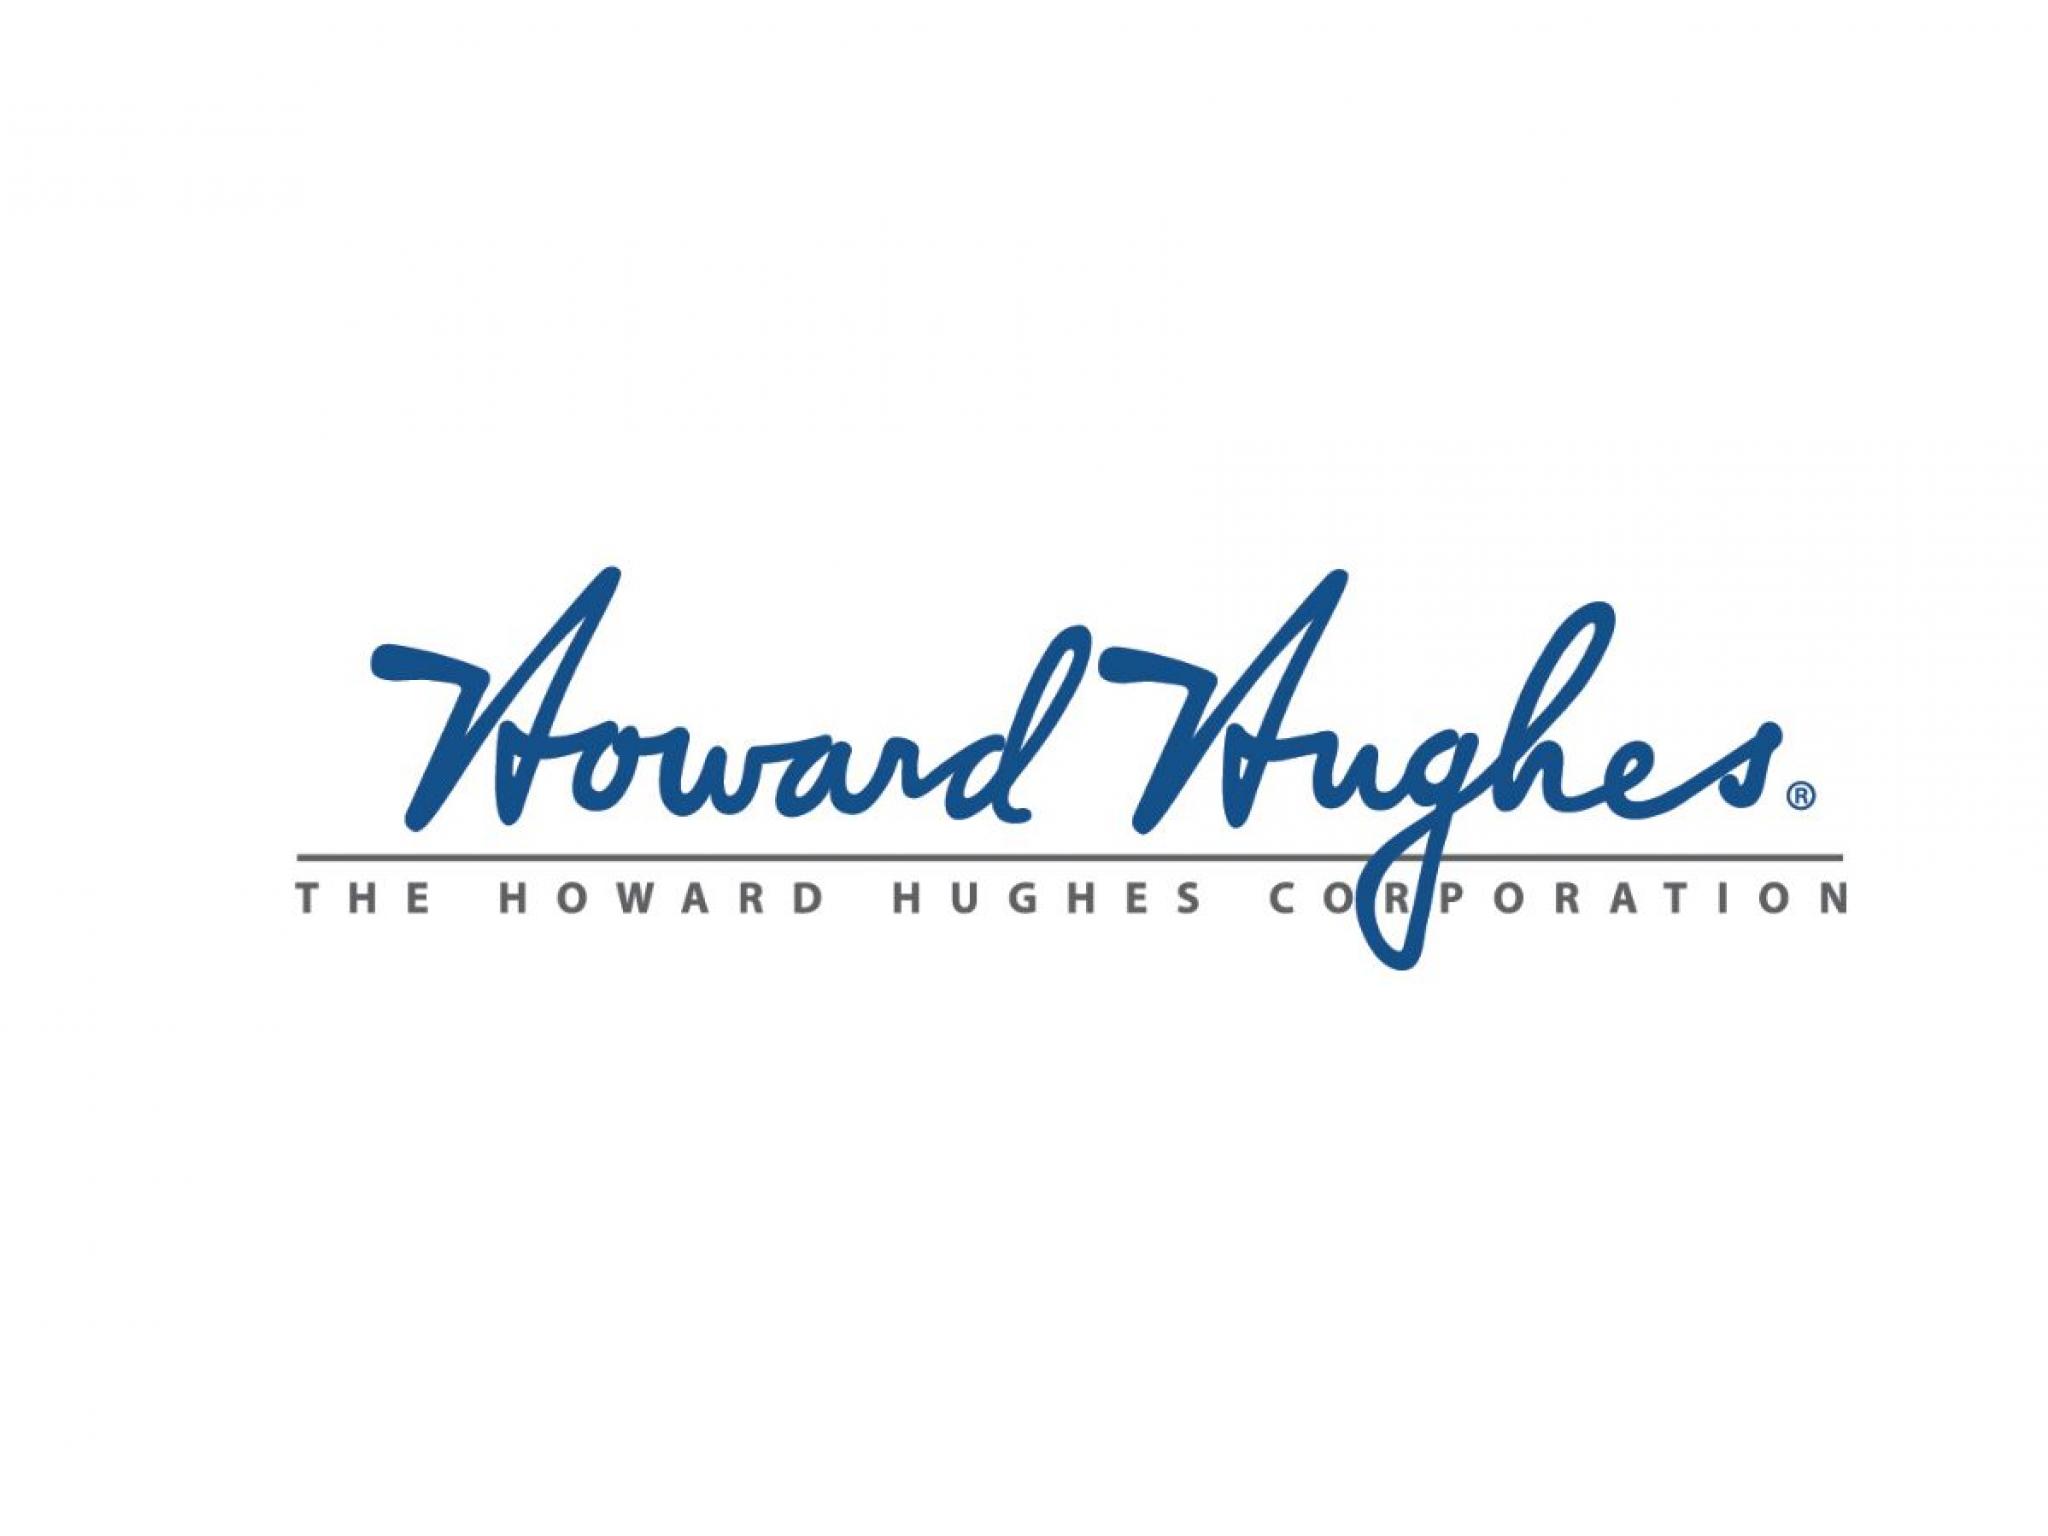  44m-bet-on-howard-hughes-check-out-these-3-stocks-insiders-are-buying 